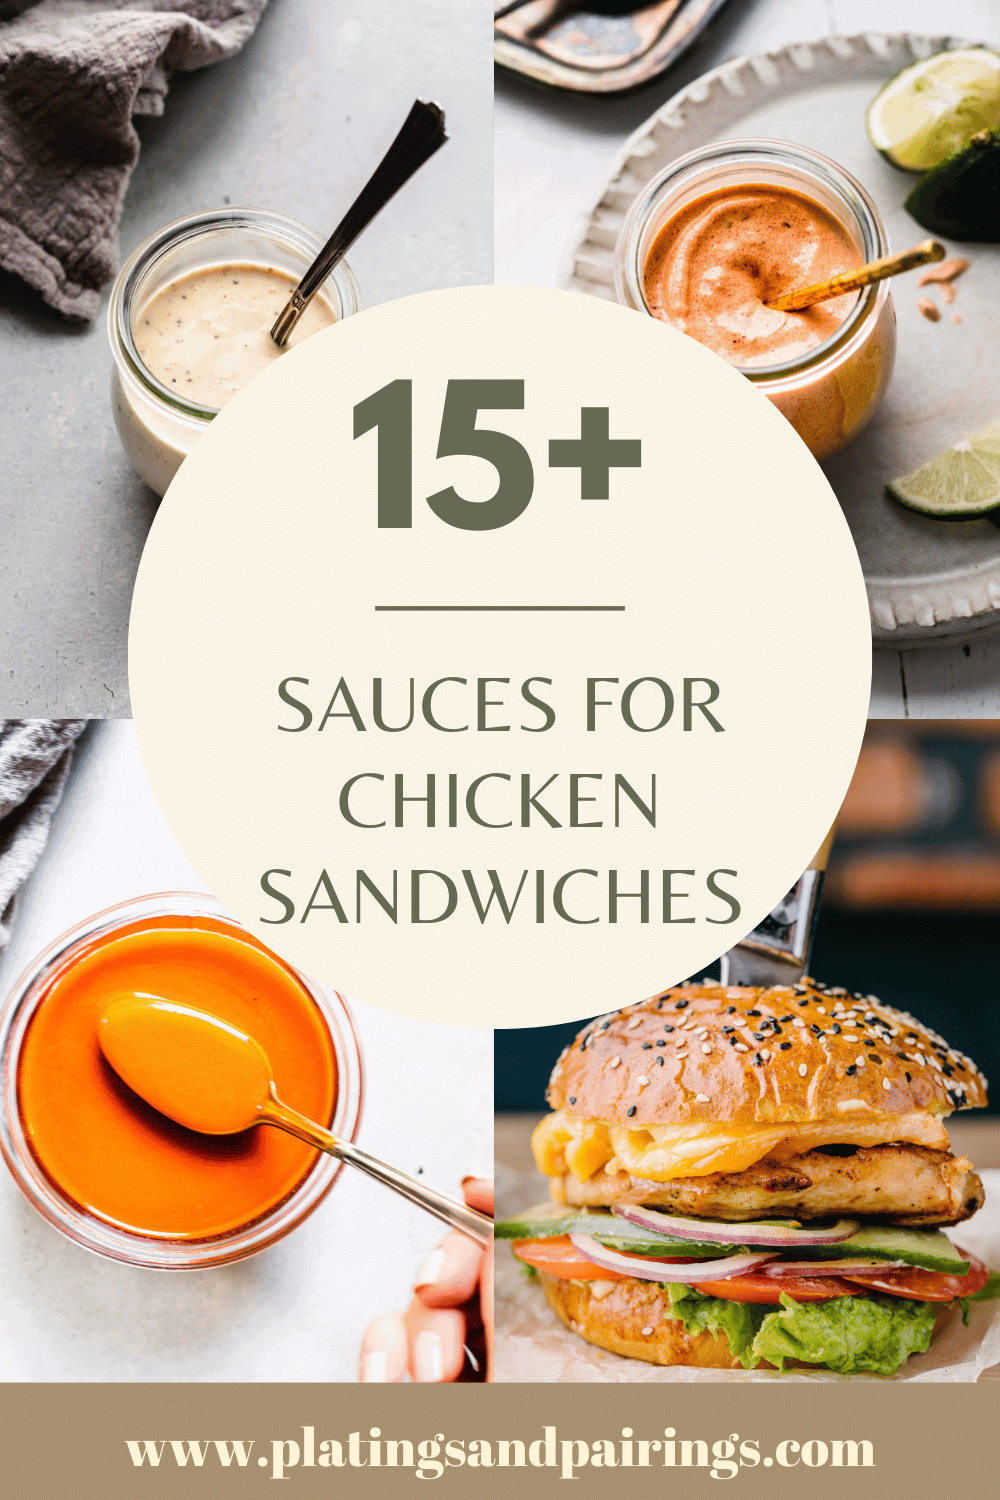 Collage of sauces for chicken sandwiches with text overlay.